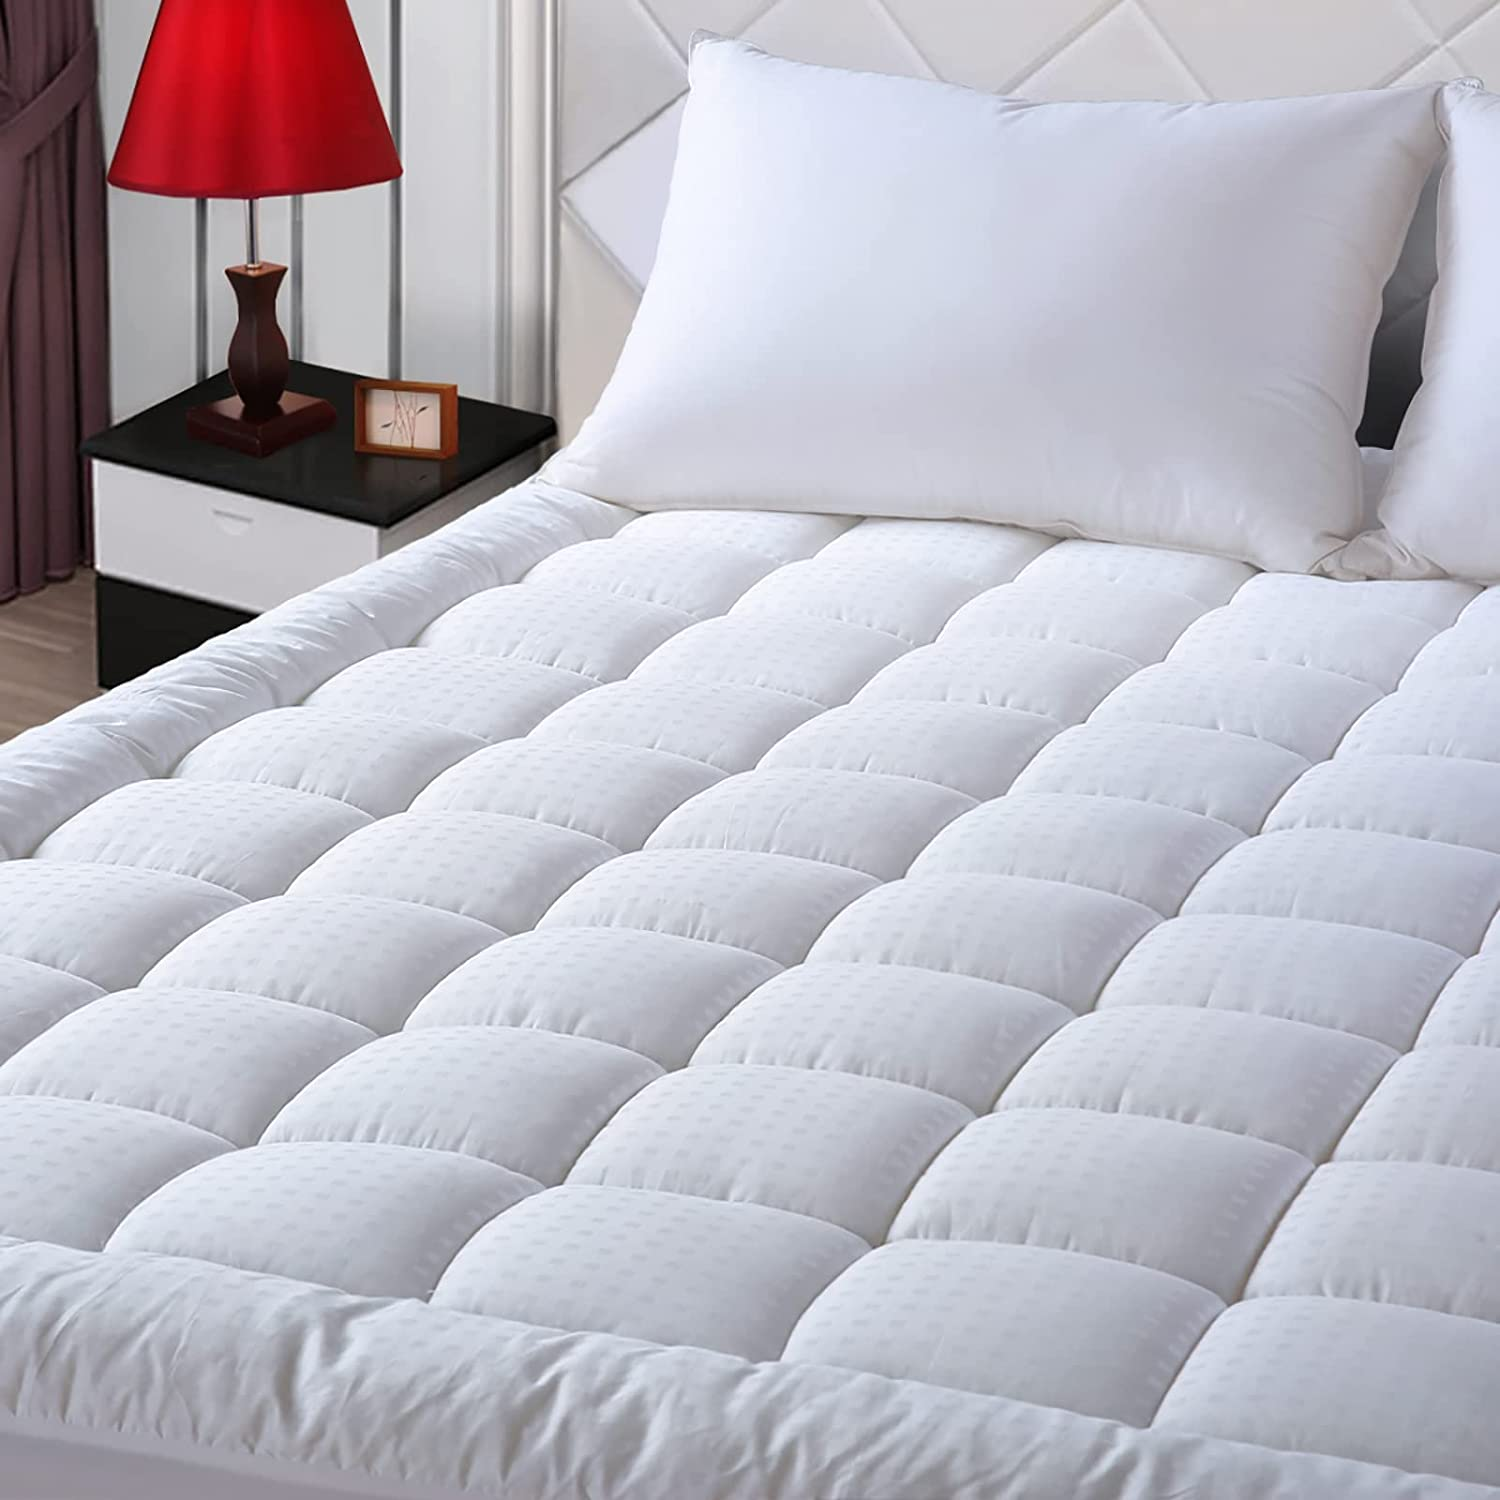  Twin Size Mattress Pad Pillow Top Mattress Cover Quilted Fitted Mattress Protector Single Cotton Top 8-21" Deep Pocket Cooling Mattress Topper (39X75 Inches, White)